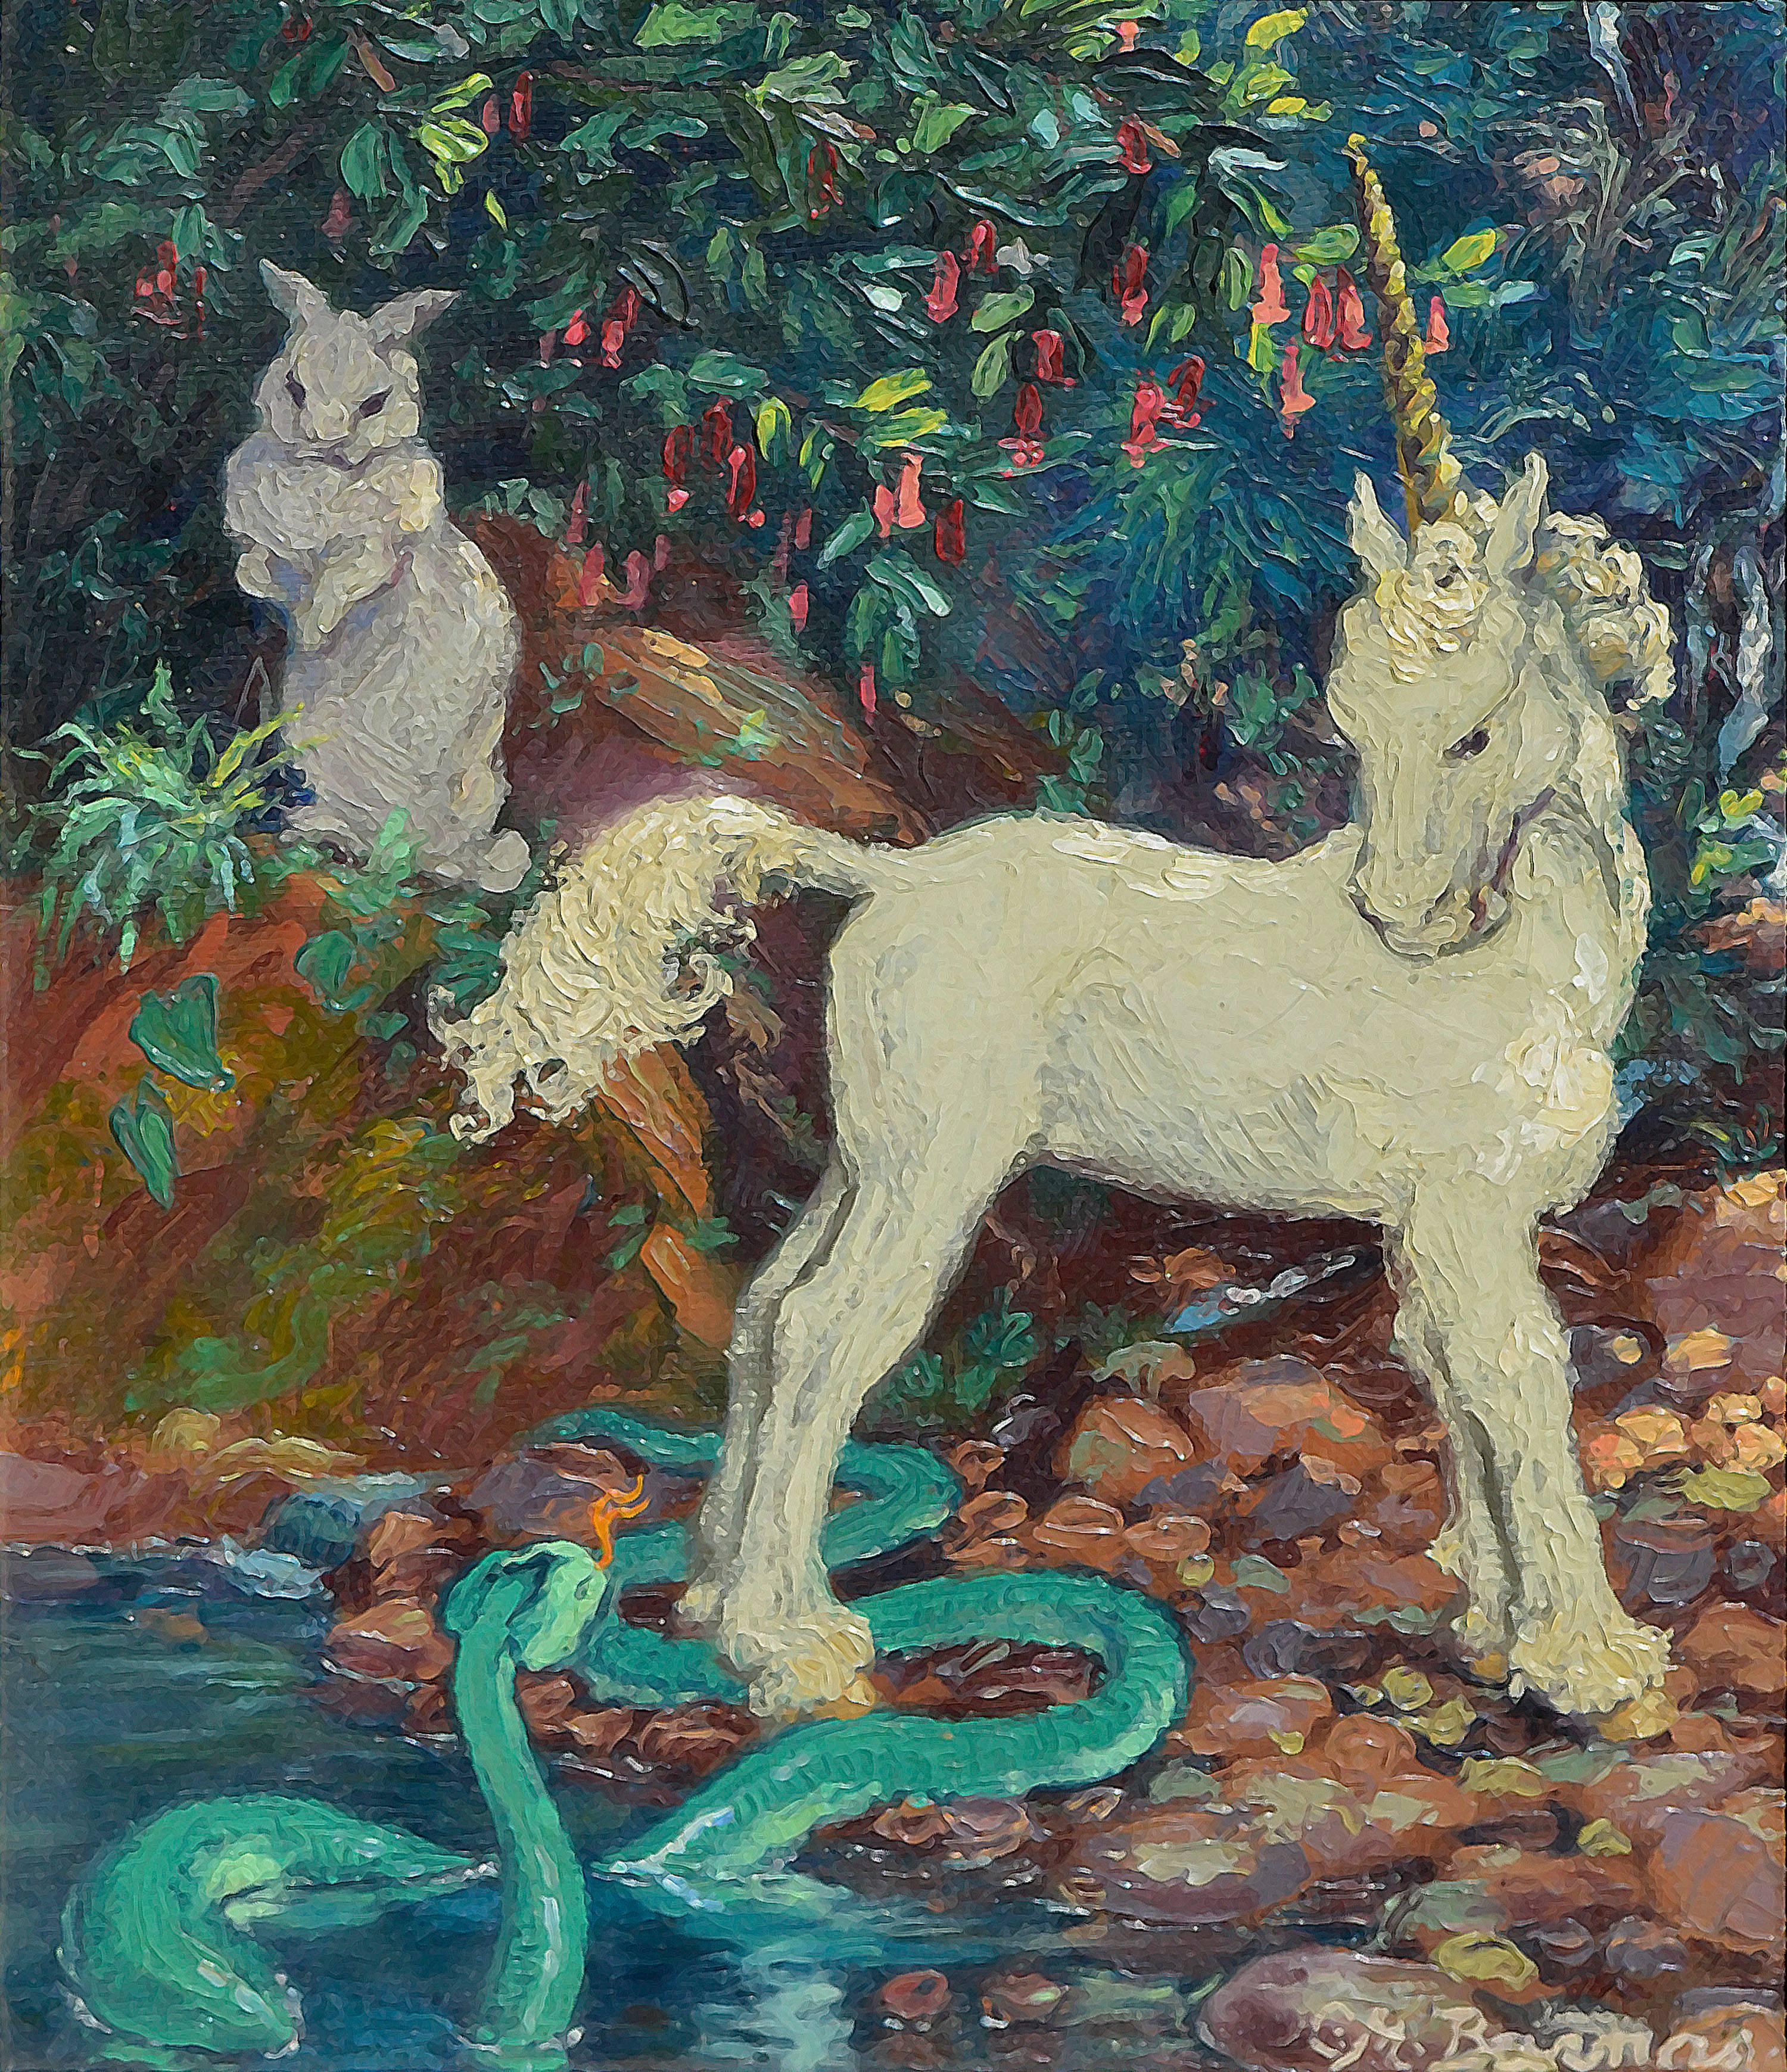 Unicorn, Serpent and Rabbit - Painting by Mary Pomeroy